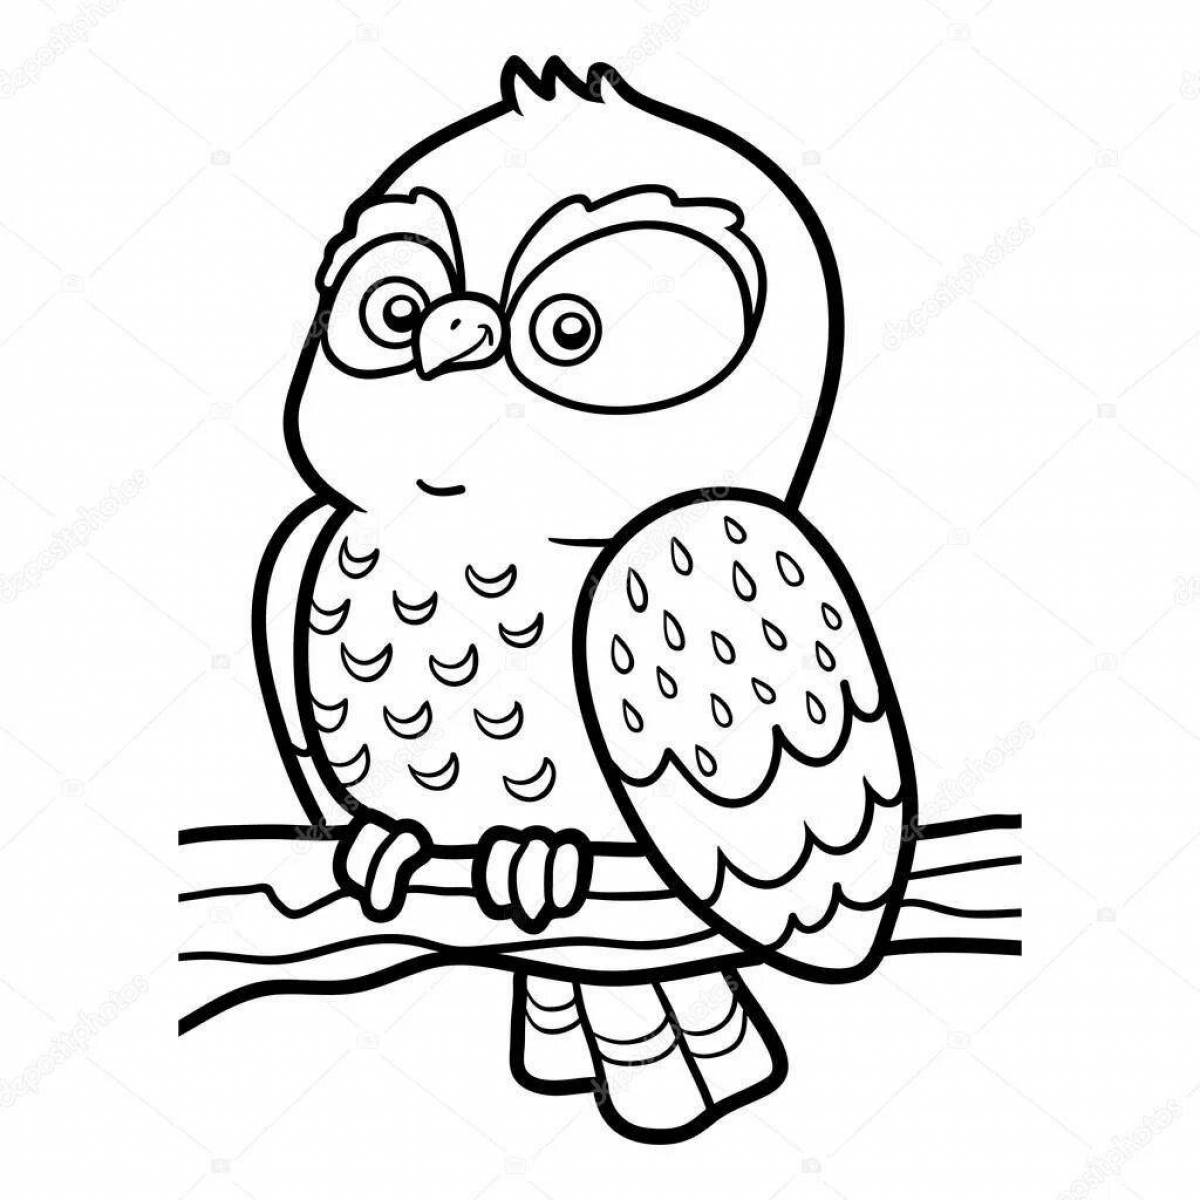 A lovely snowy owl coloring page for beginners